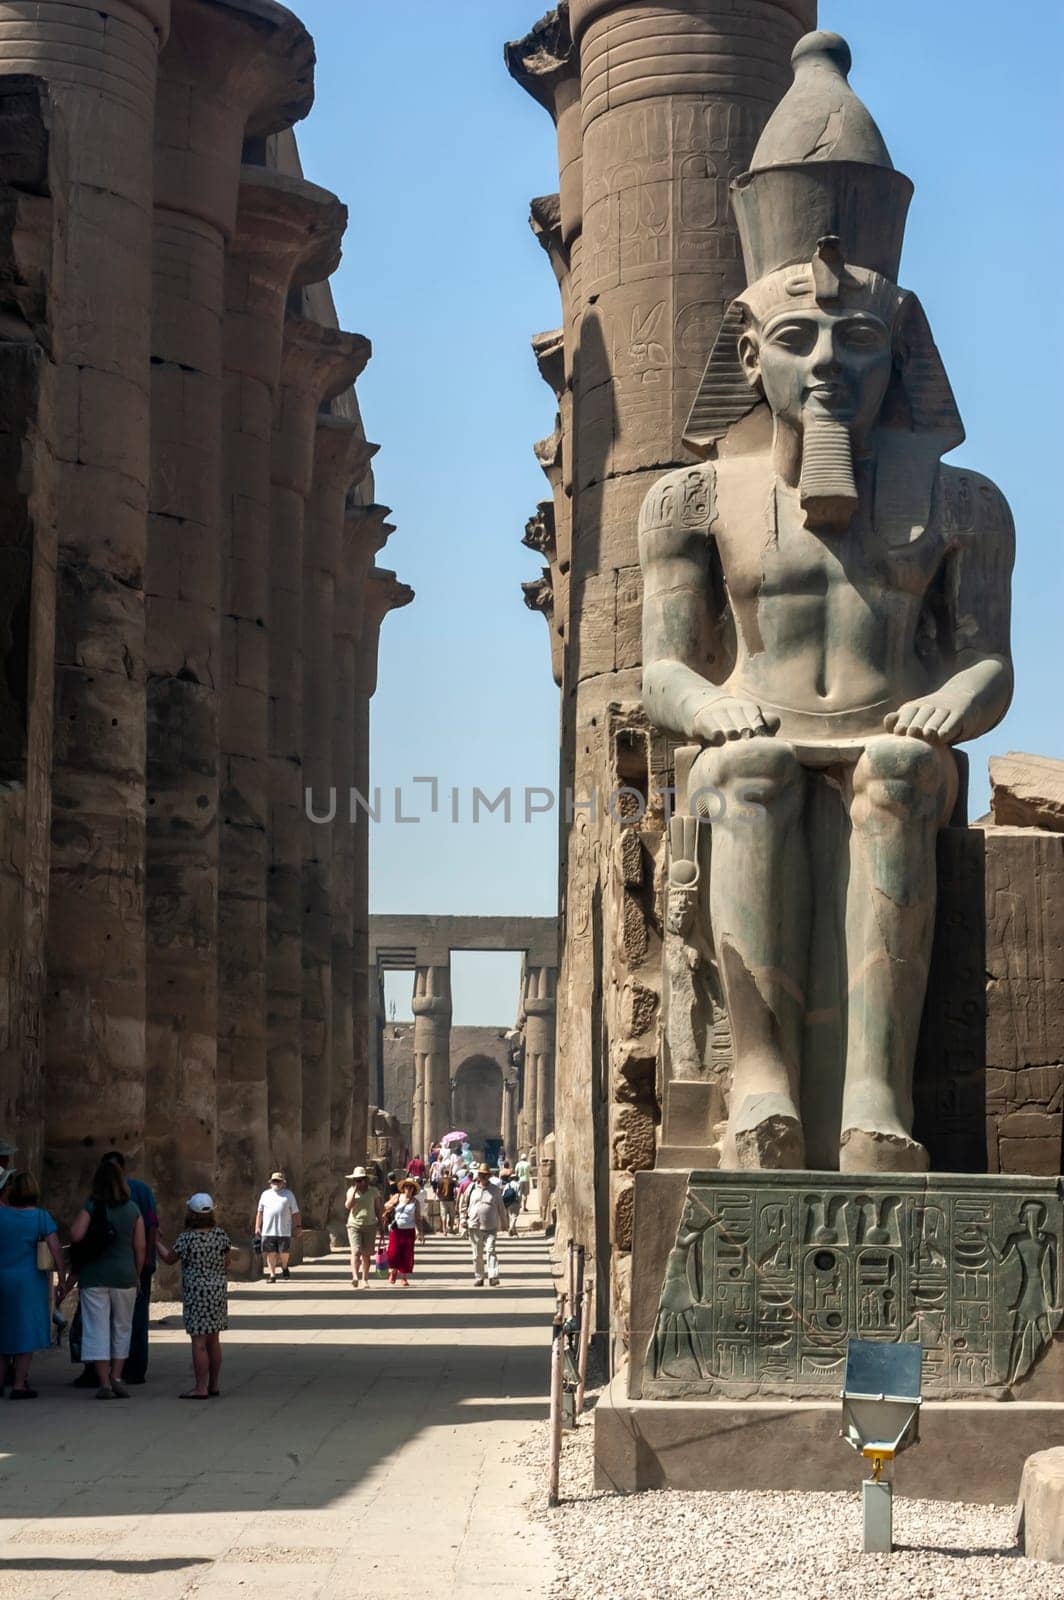 Tourists at Karnak complex by Giamplume